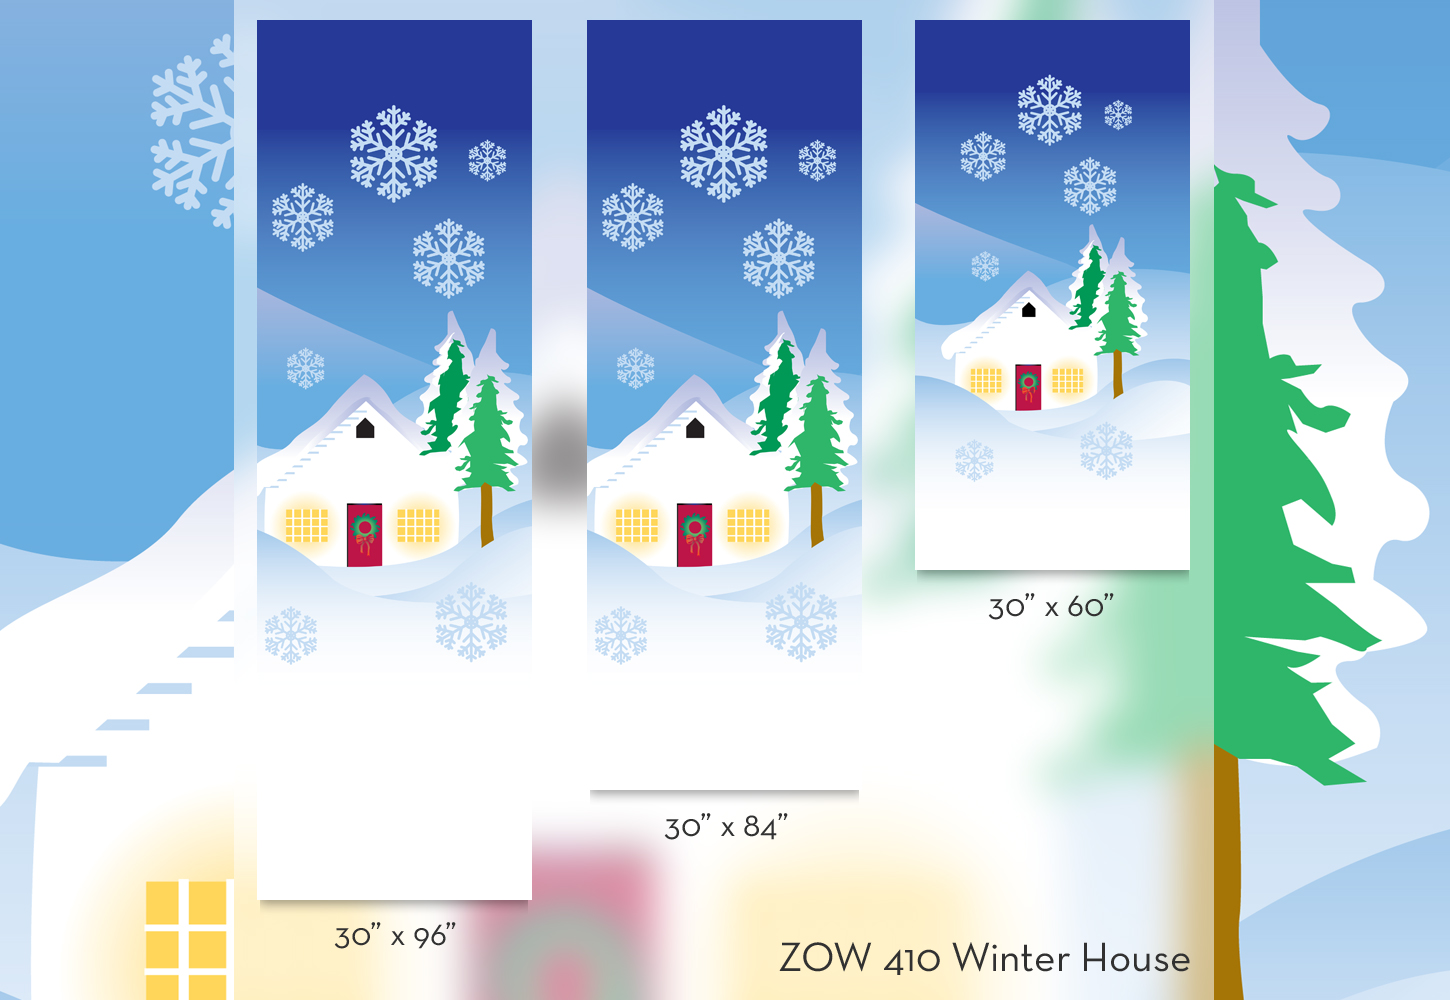 ZOW 410 Winter House